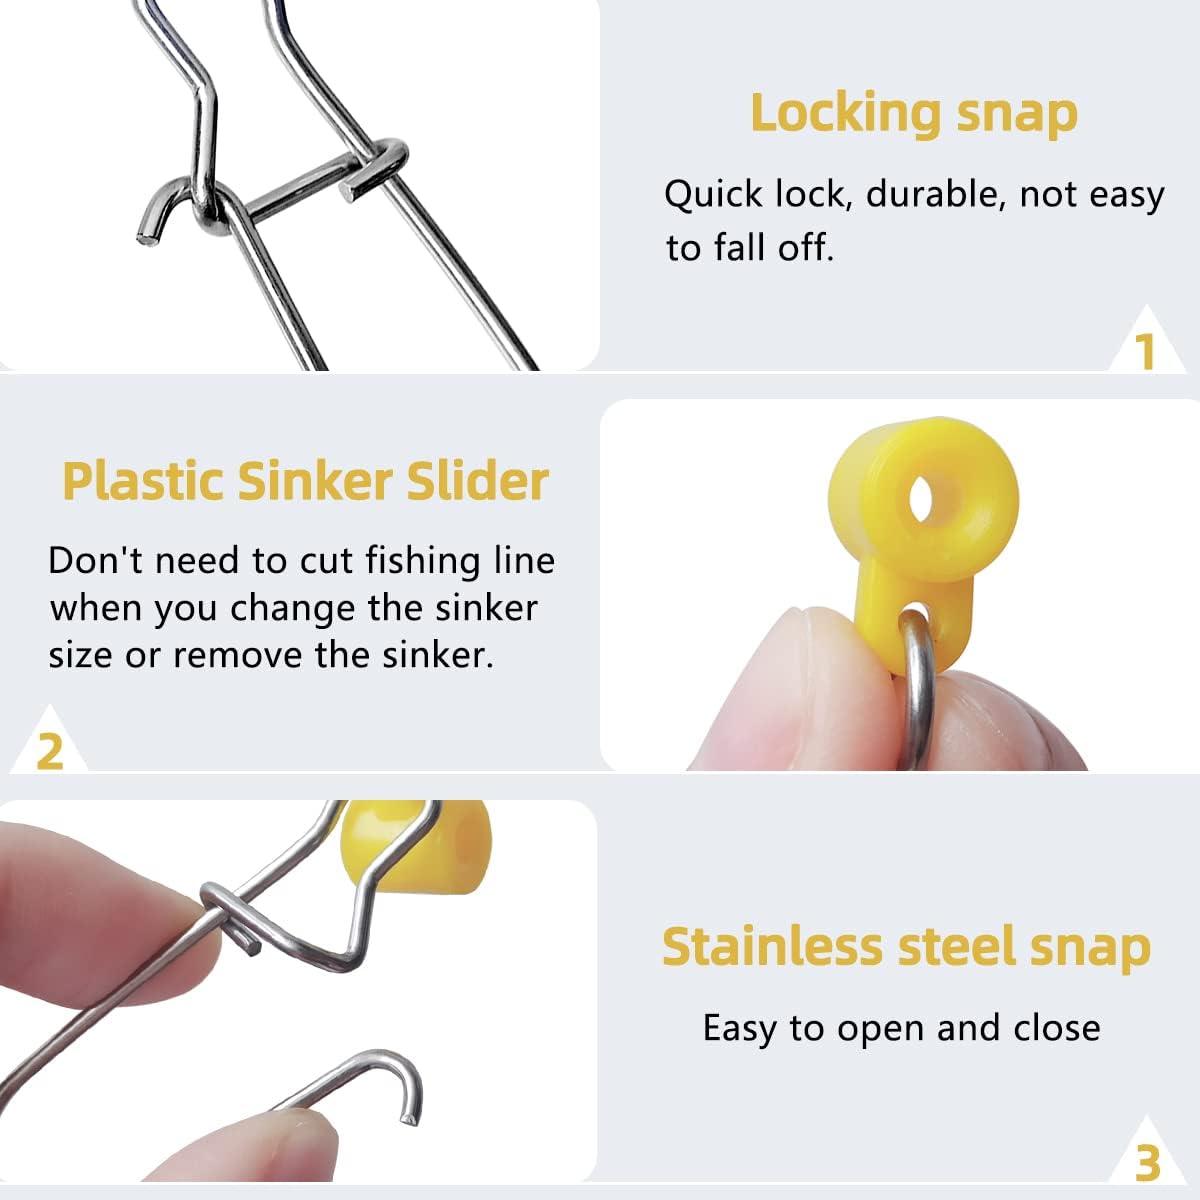 40Pcs Stainless Steel Fishing Line Sinker Slides Catfishing Rig with Duo  Lock Snaps Heavy Duty Sinker Slider Swivel Snap Kit for Fishing Tackle  Yellow